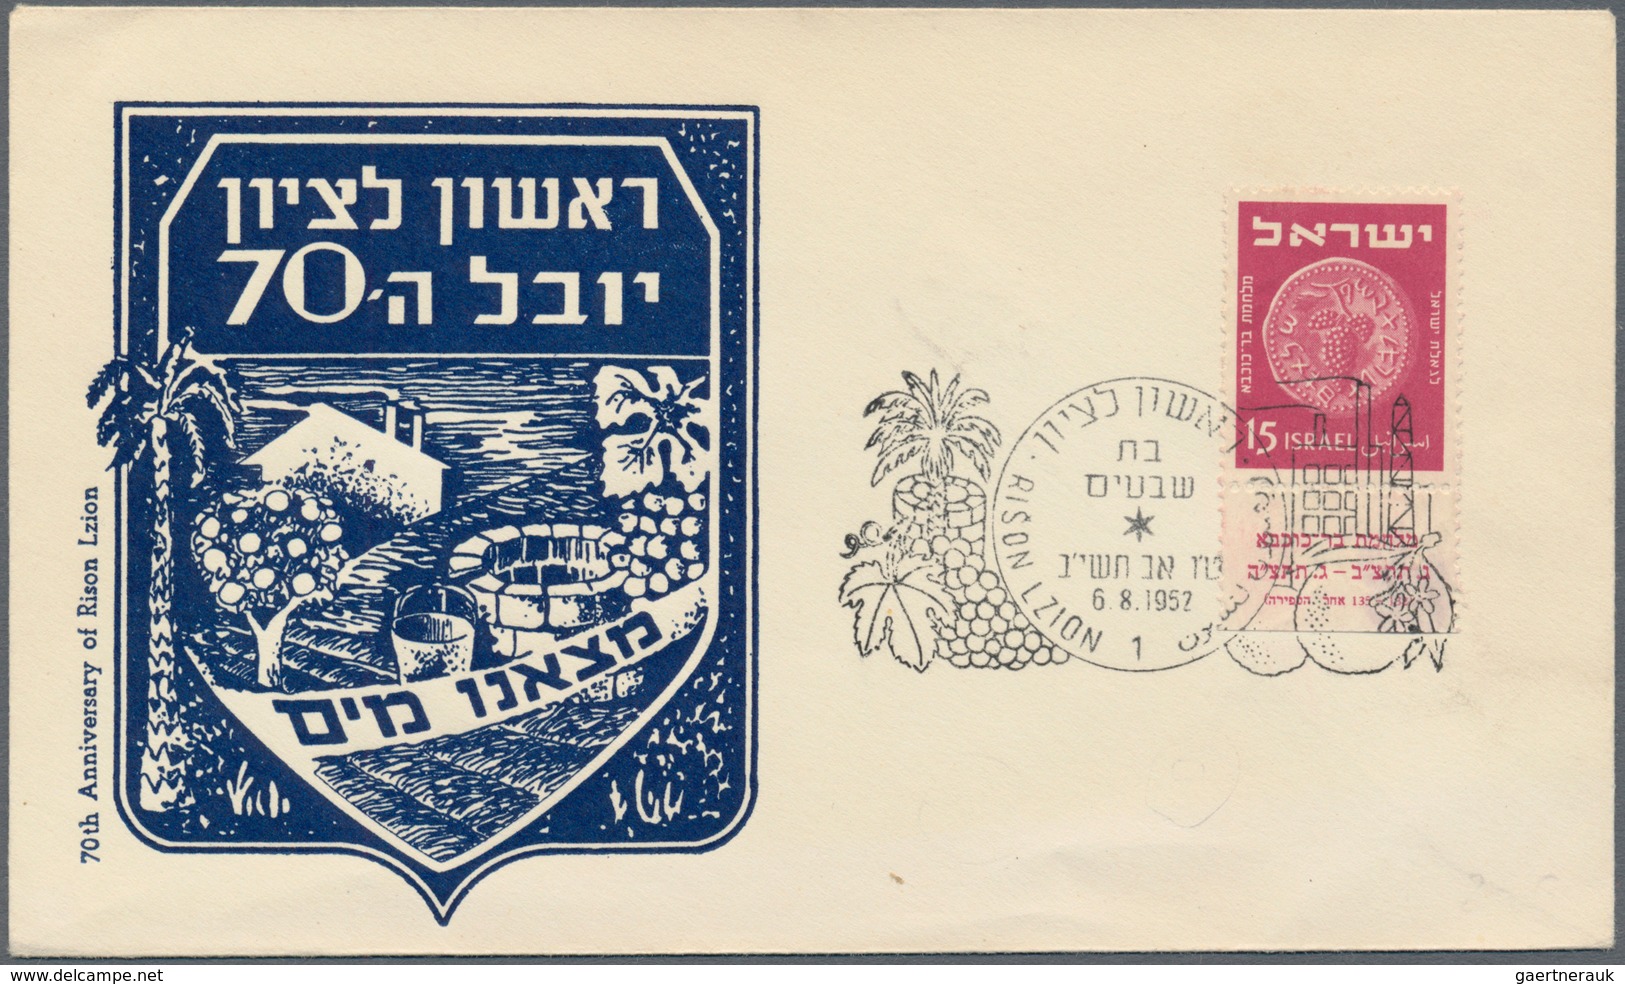 Israel: 1948/1948, SEPCIAL EVENT/SLOGAN POSTMARKS, assortment of apprx. 390 covers (mainly cacheted